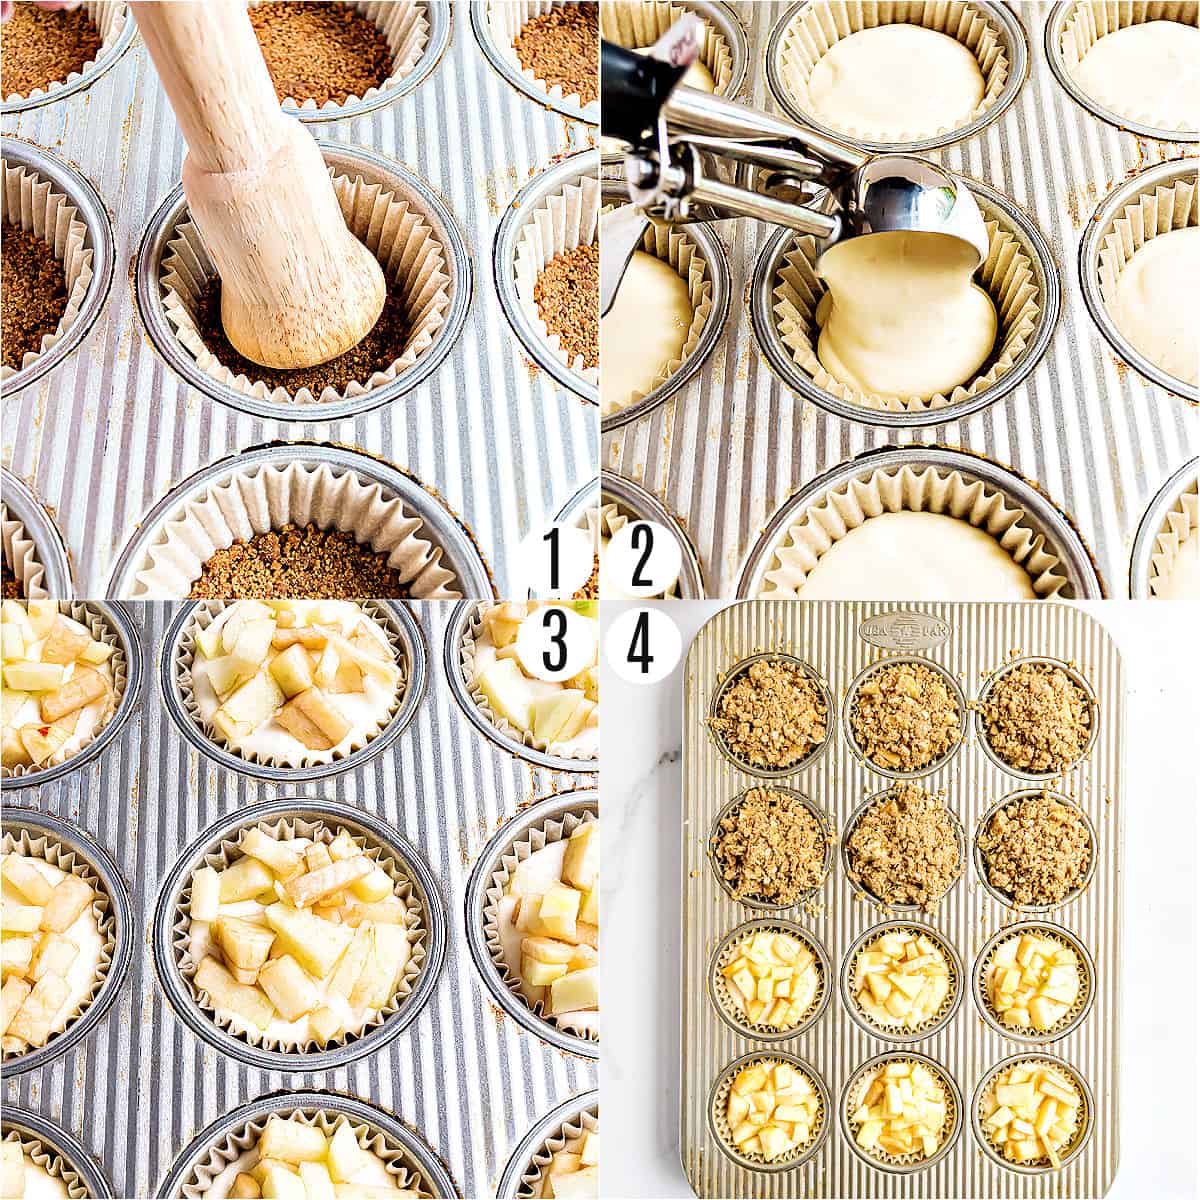 Step by step photos showing how to make mini caramel apple cheesecakes.